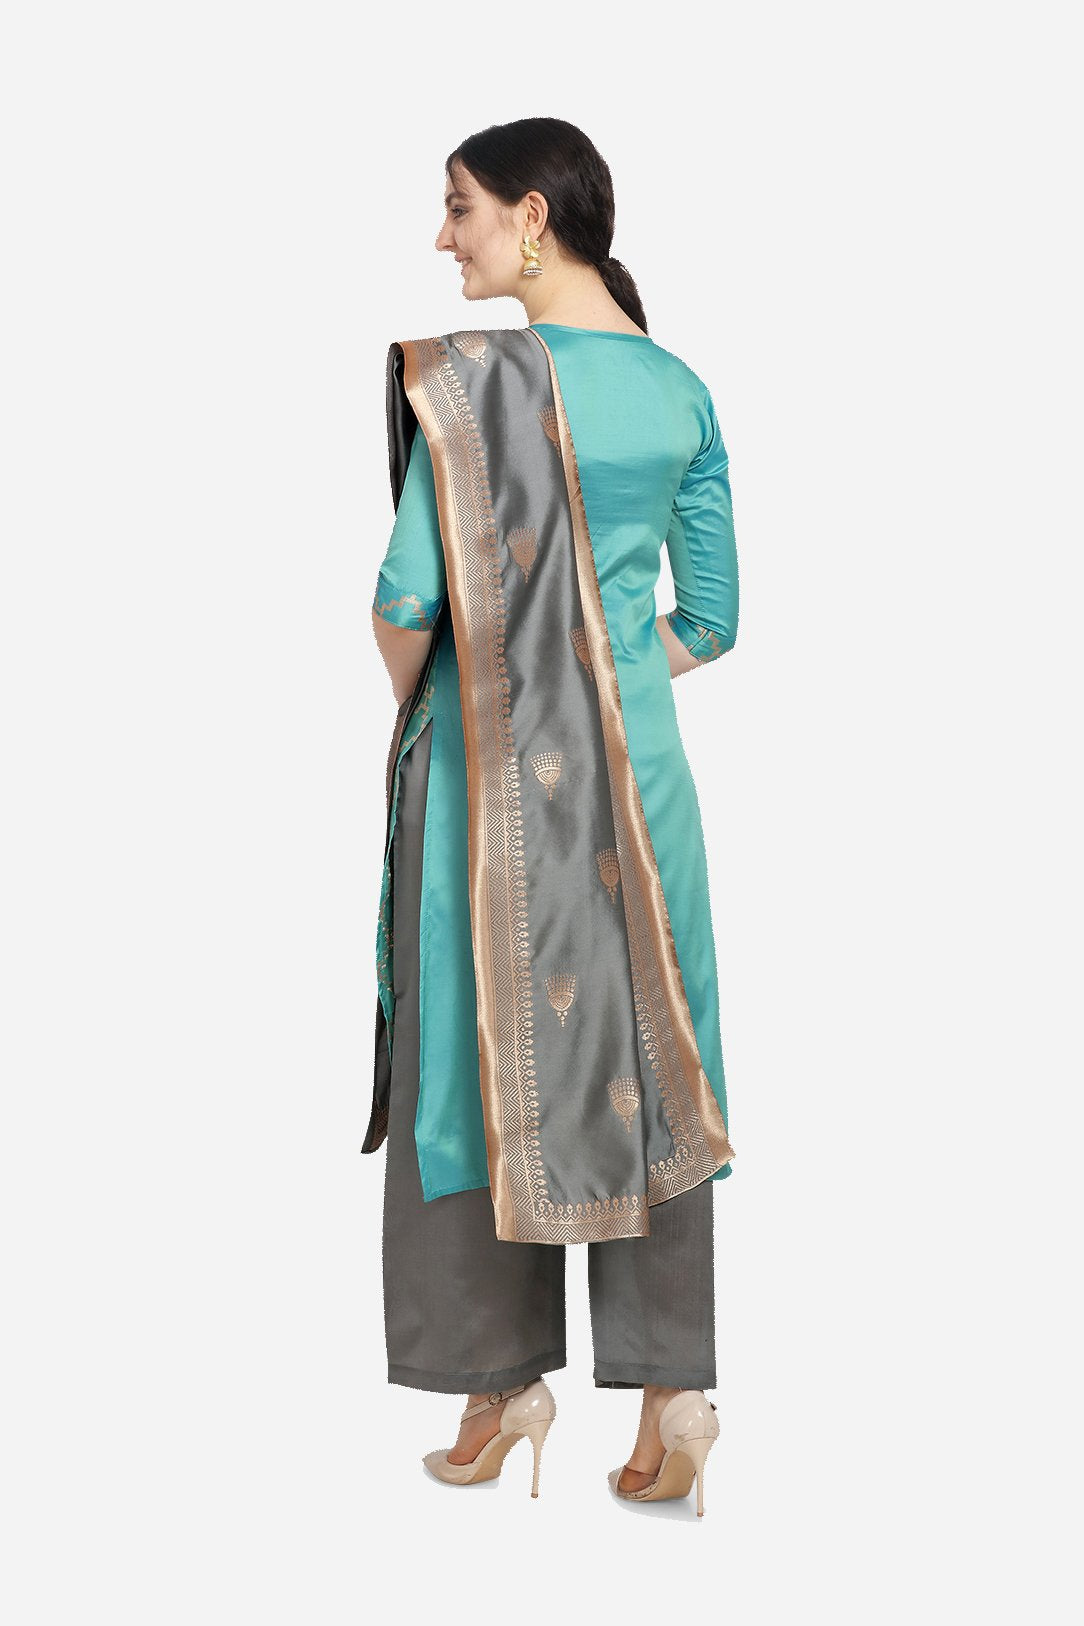 Sea Blue And Grey Cotton Jacquard Dress Material